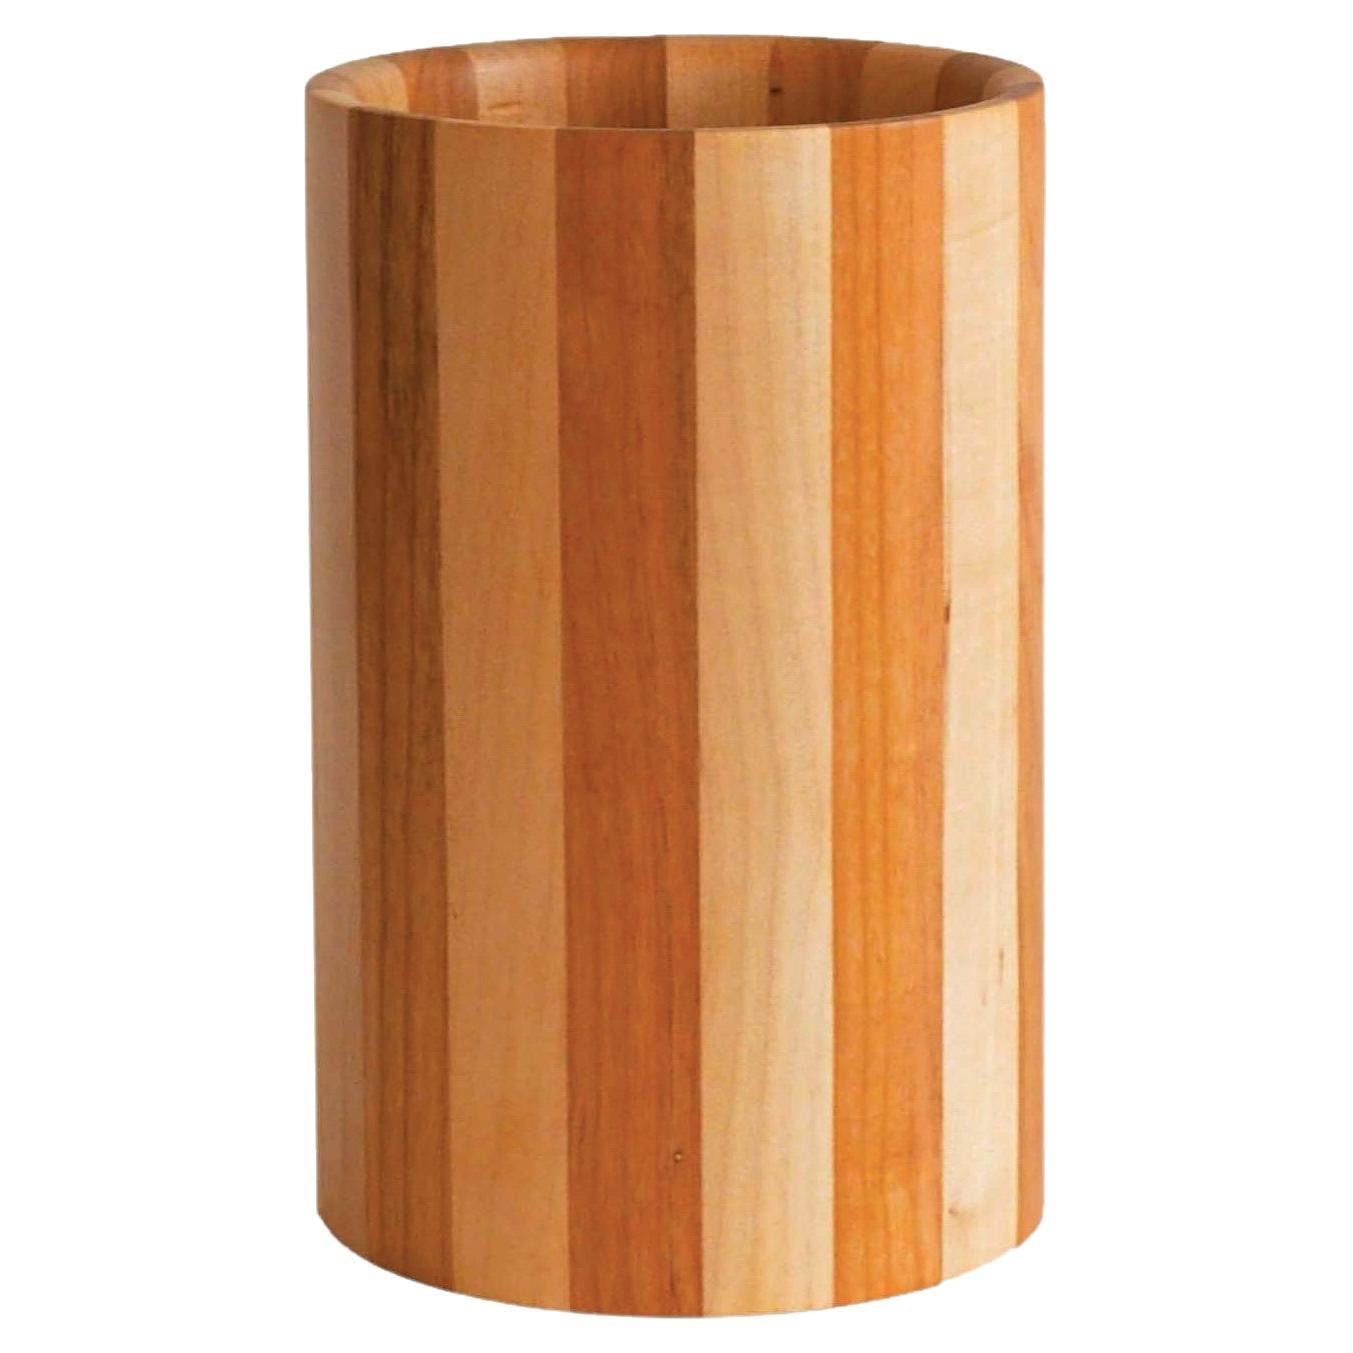 Cylindrical Vase, maple and cherry wood, handmade in France, OROS Edition For Sale